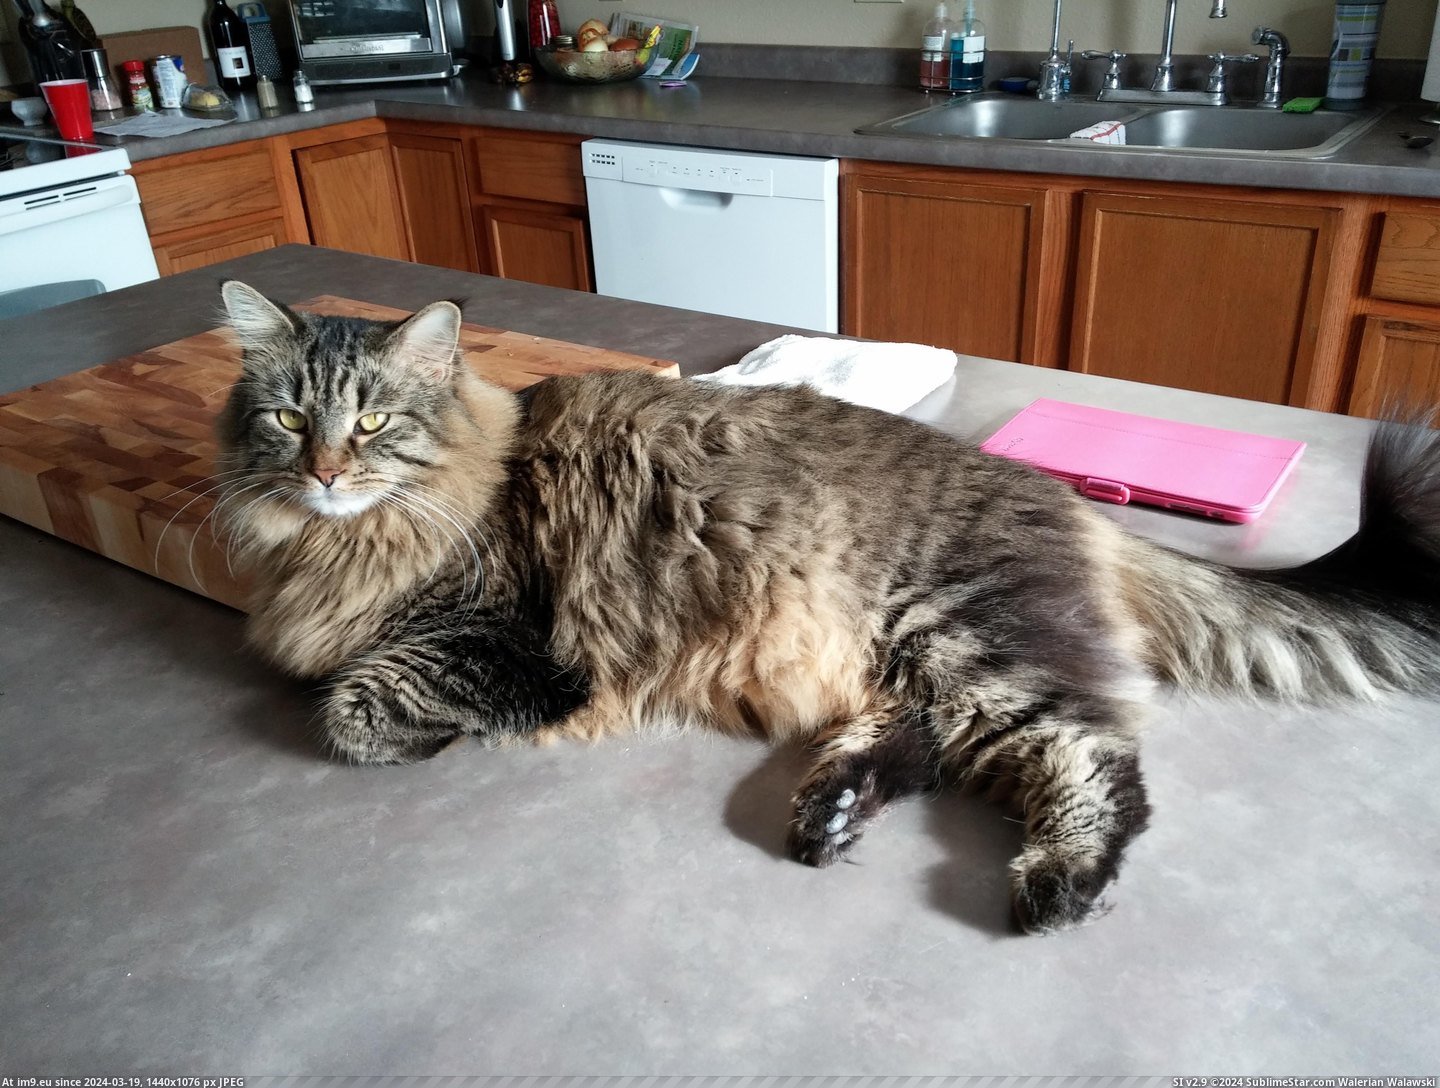 #Cats #Cat #Fluffy #Malak #Outgoing #Boy #Super [Cats] My cat Malak, a super outgoing and fluffy boy, he's the best. 5 Pic. (Image of album My r/CATS favs))